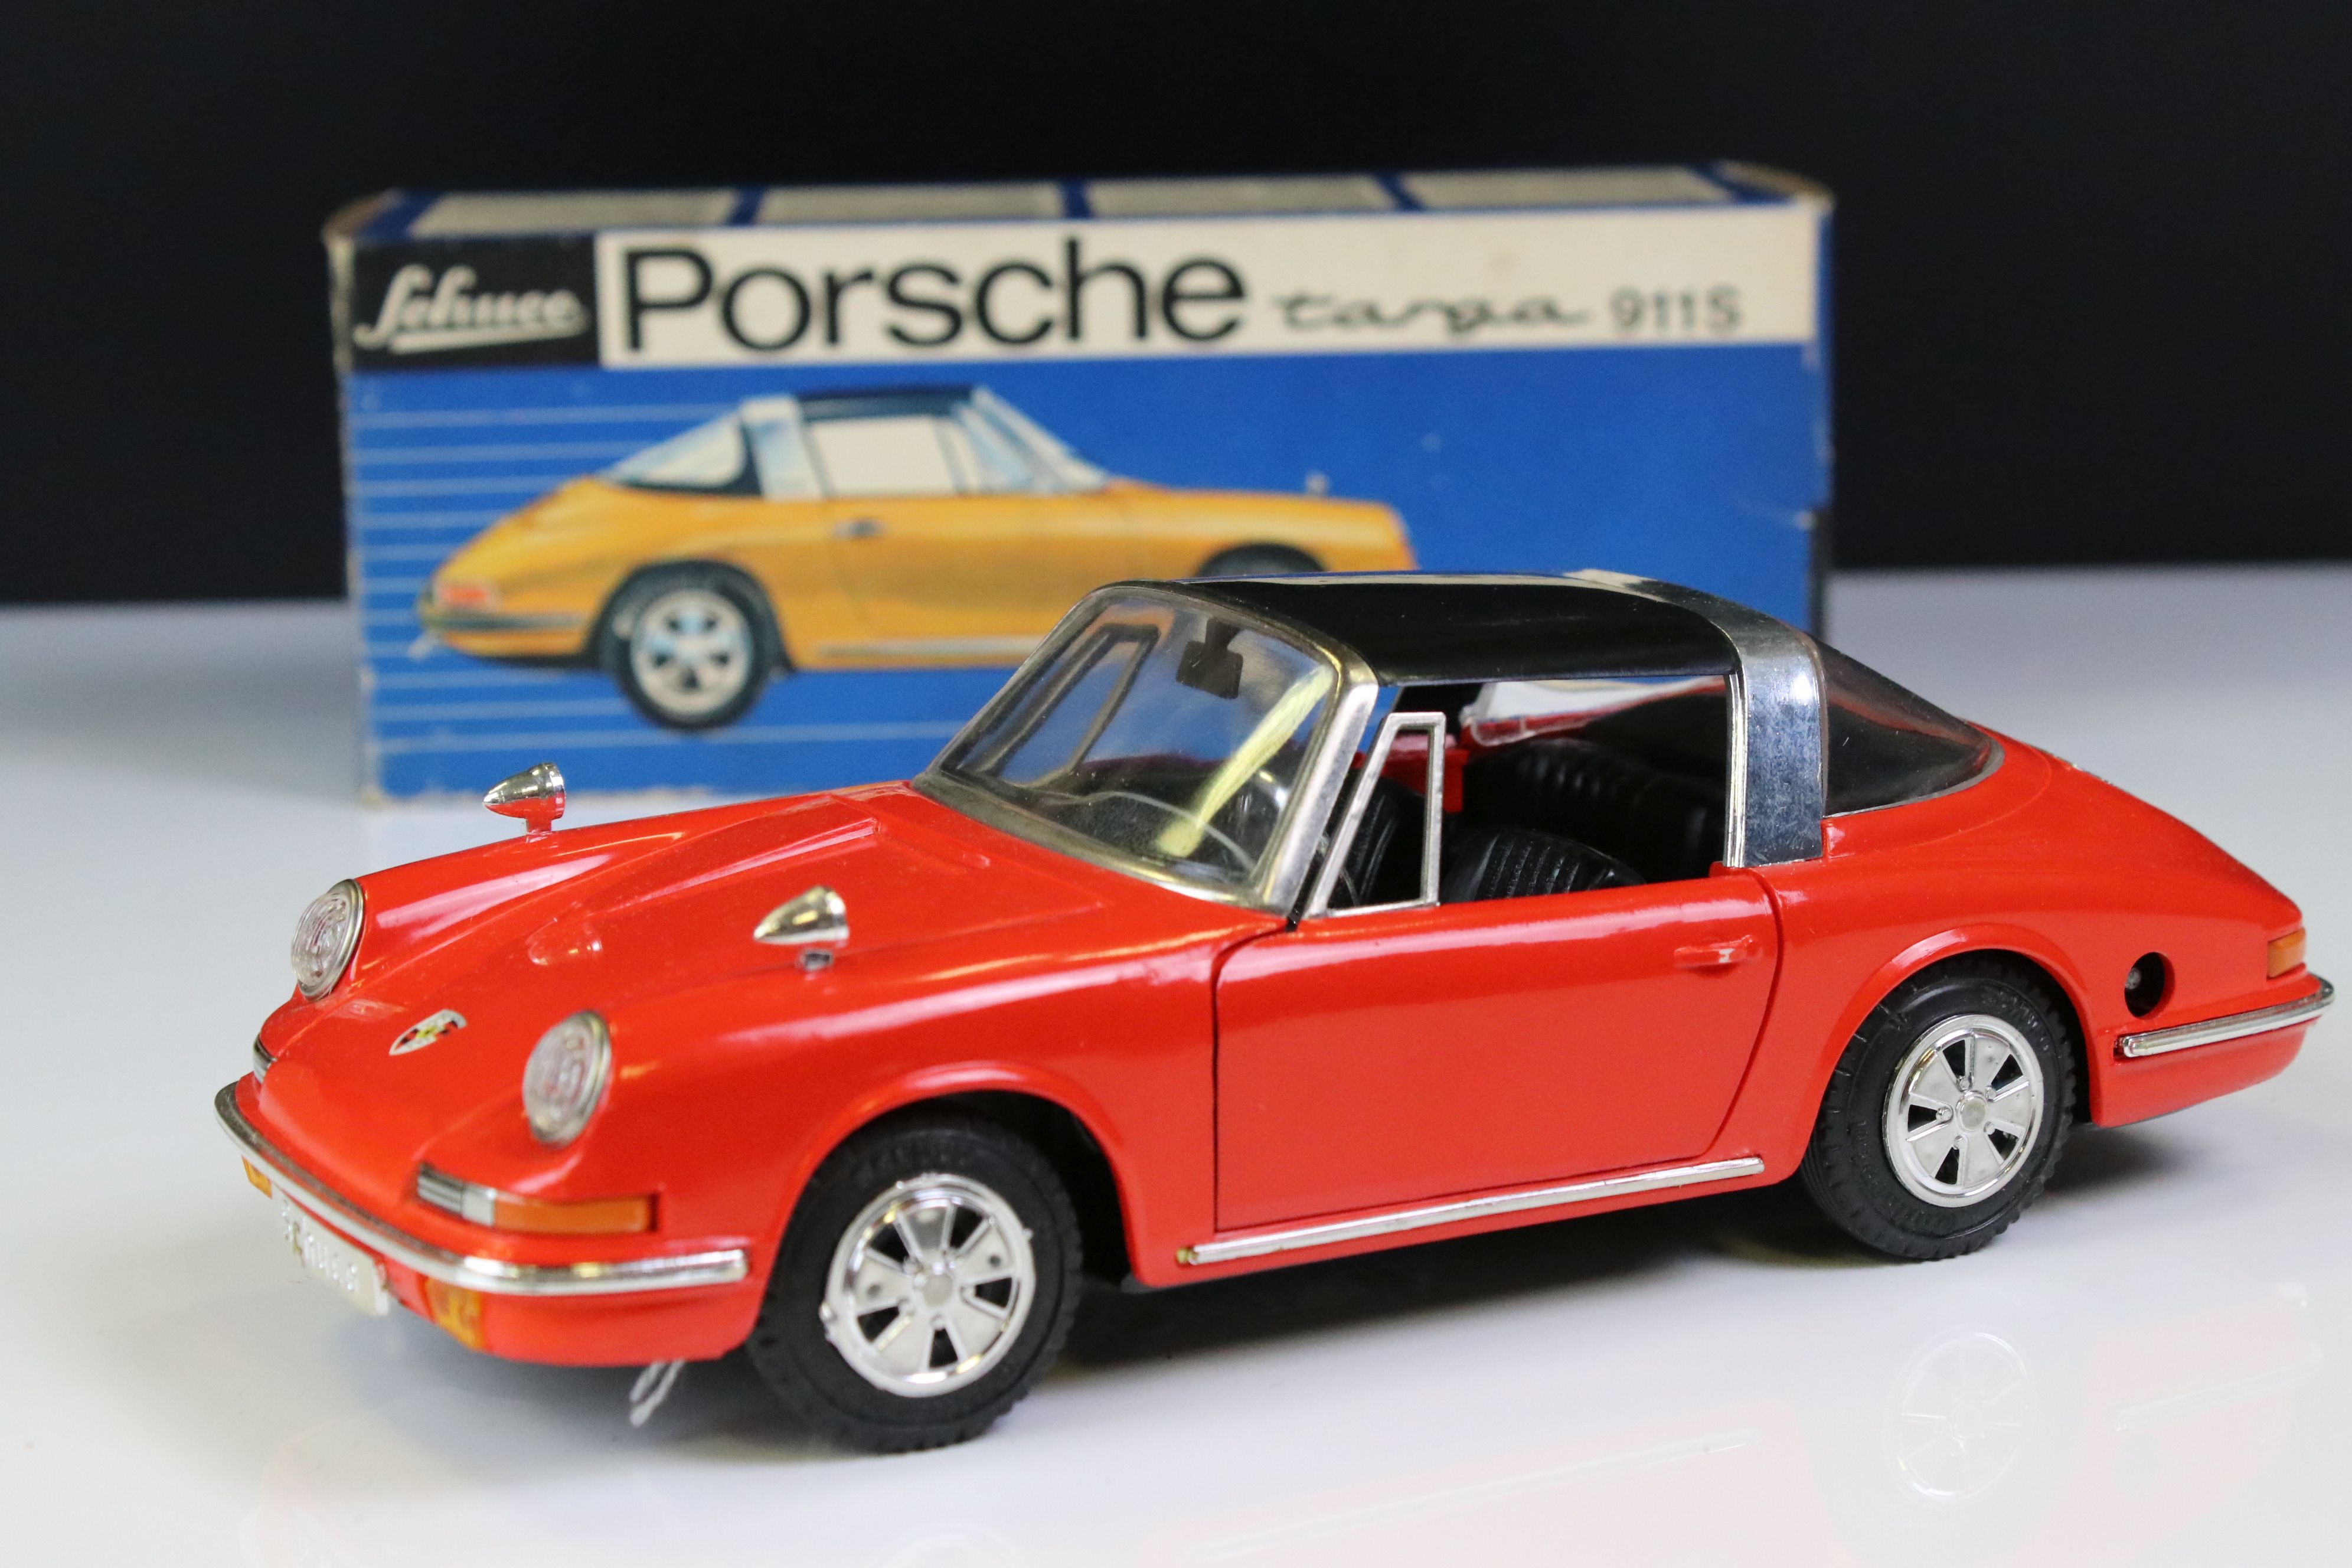 Boxed Schuco clockwork Porsche Targa 911S in red with black roof, vg condition with only minor paint